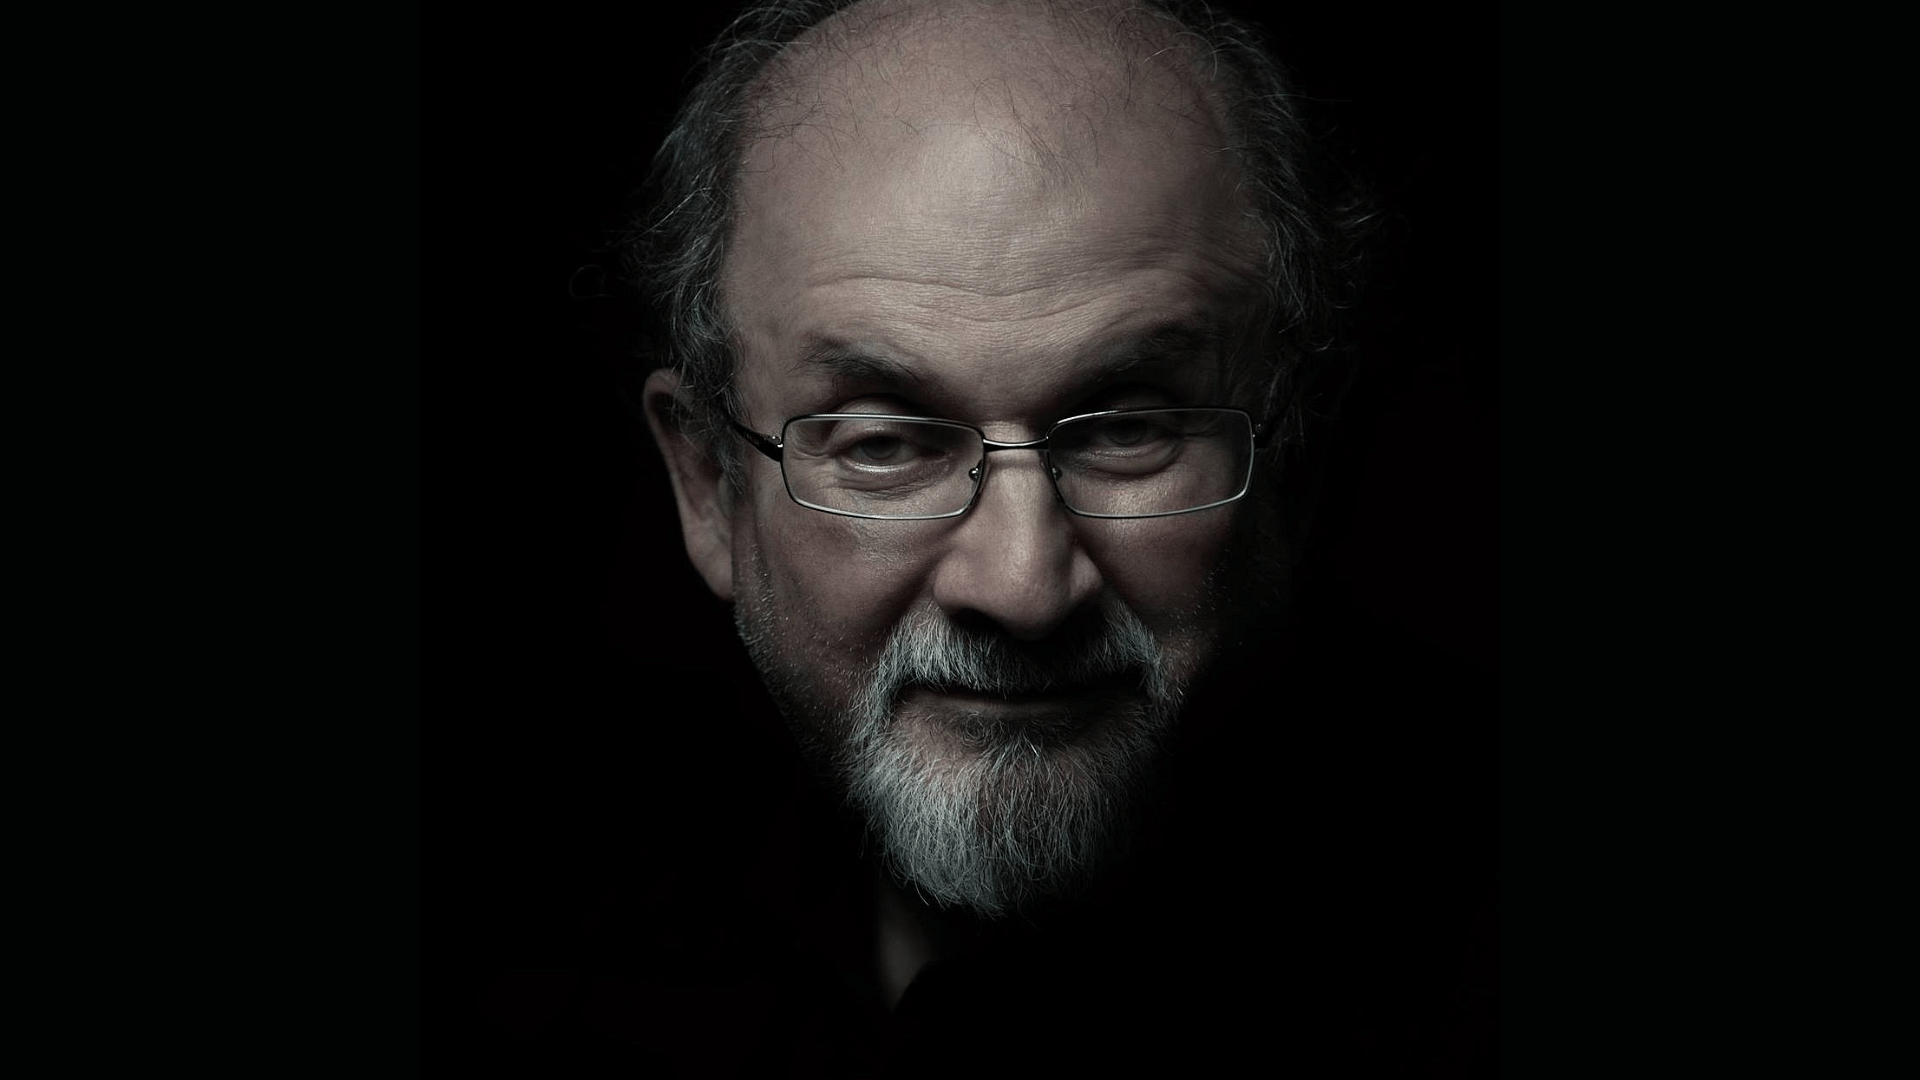 <div class="paragraphs"><p>Indian-origin British author <a href="https://www.thequint.com/voices/opinion/the-attack-on-salman-rushdie-is-also-an-attack-on-freedom-of-expression">Salman Rushdie</a> was taken off the ventilator and was able to speak, the author’s agent confirmed on Saturday, 13 August.</p></div>